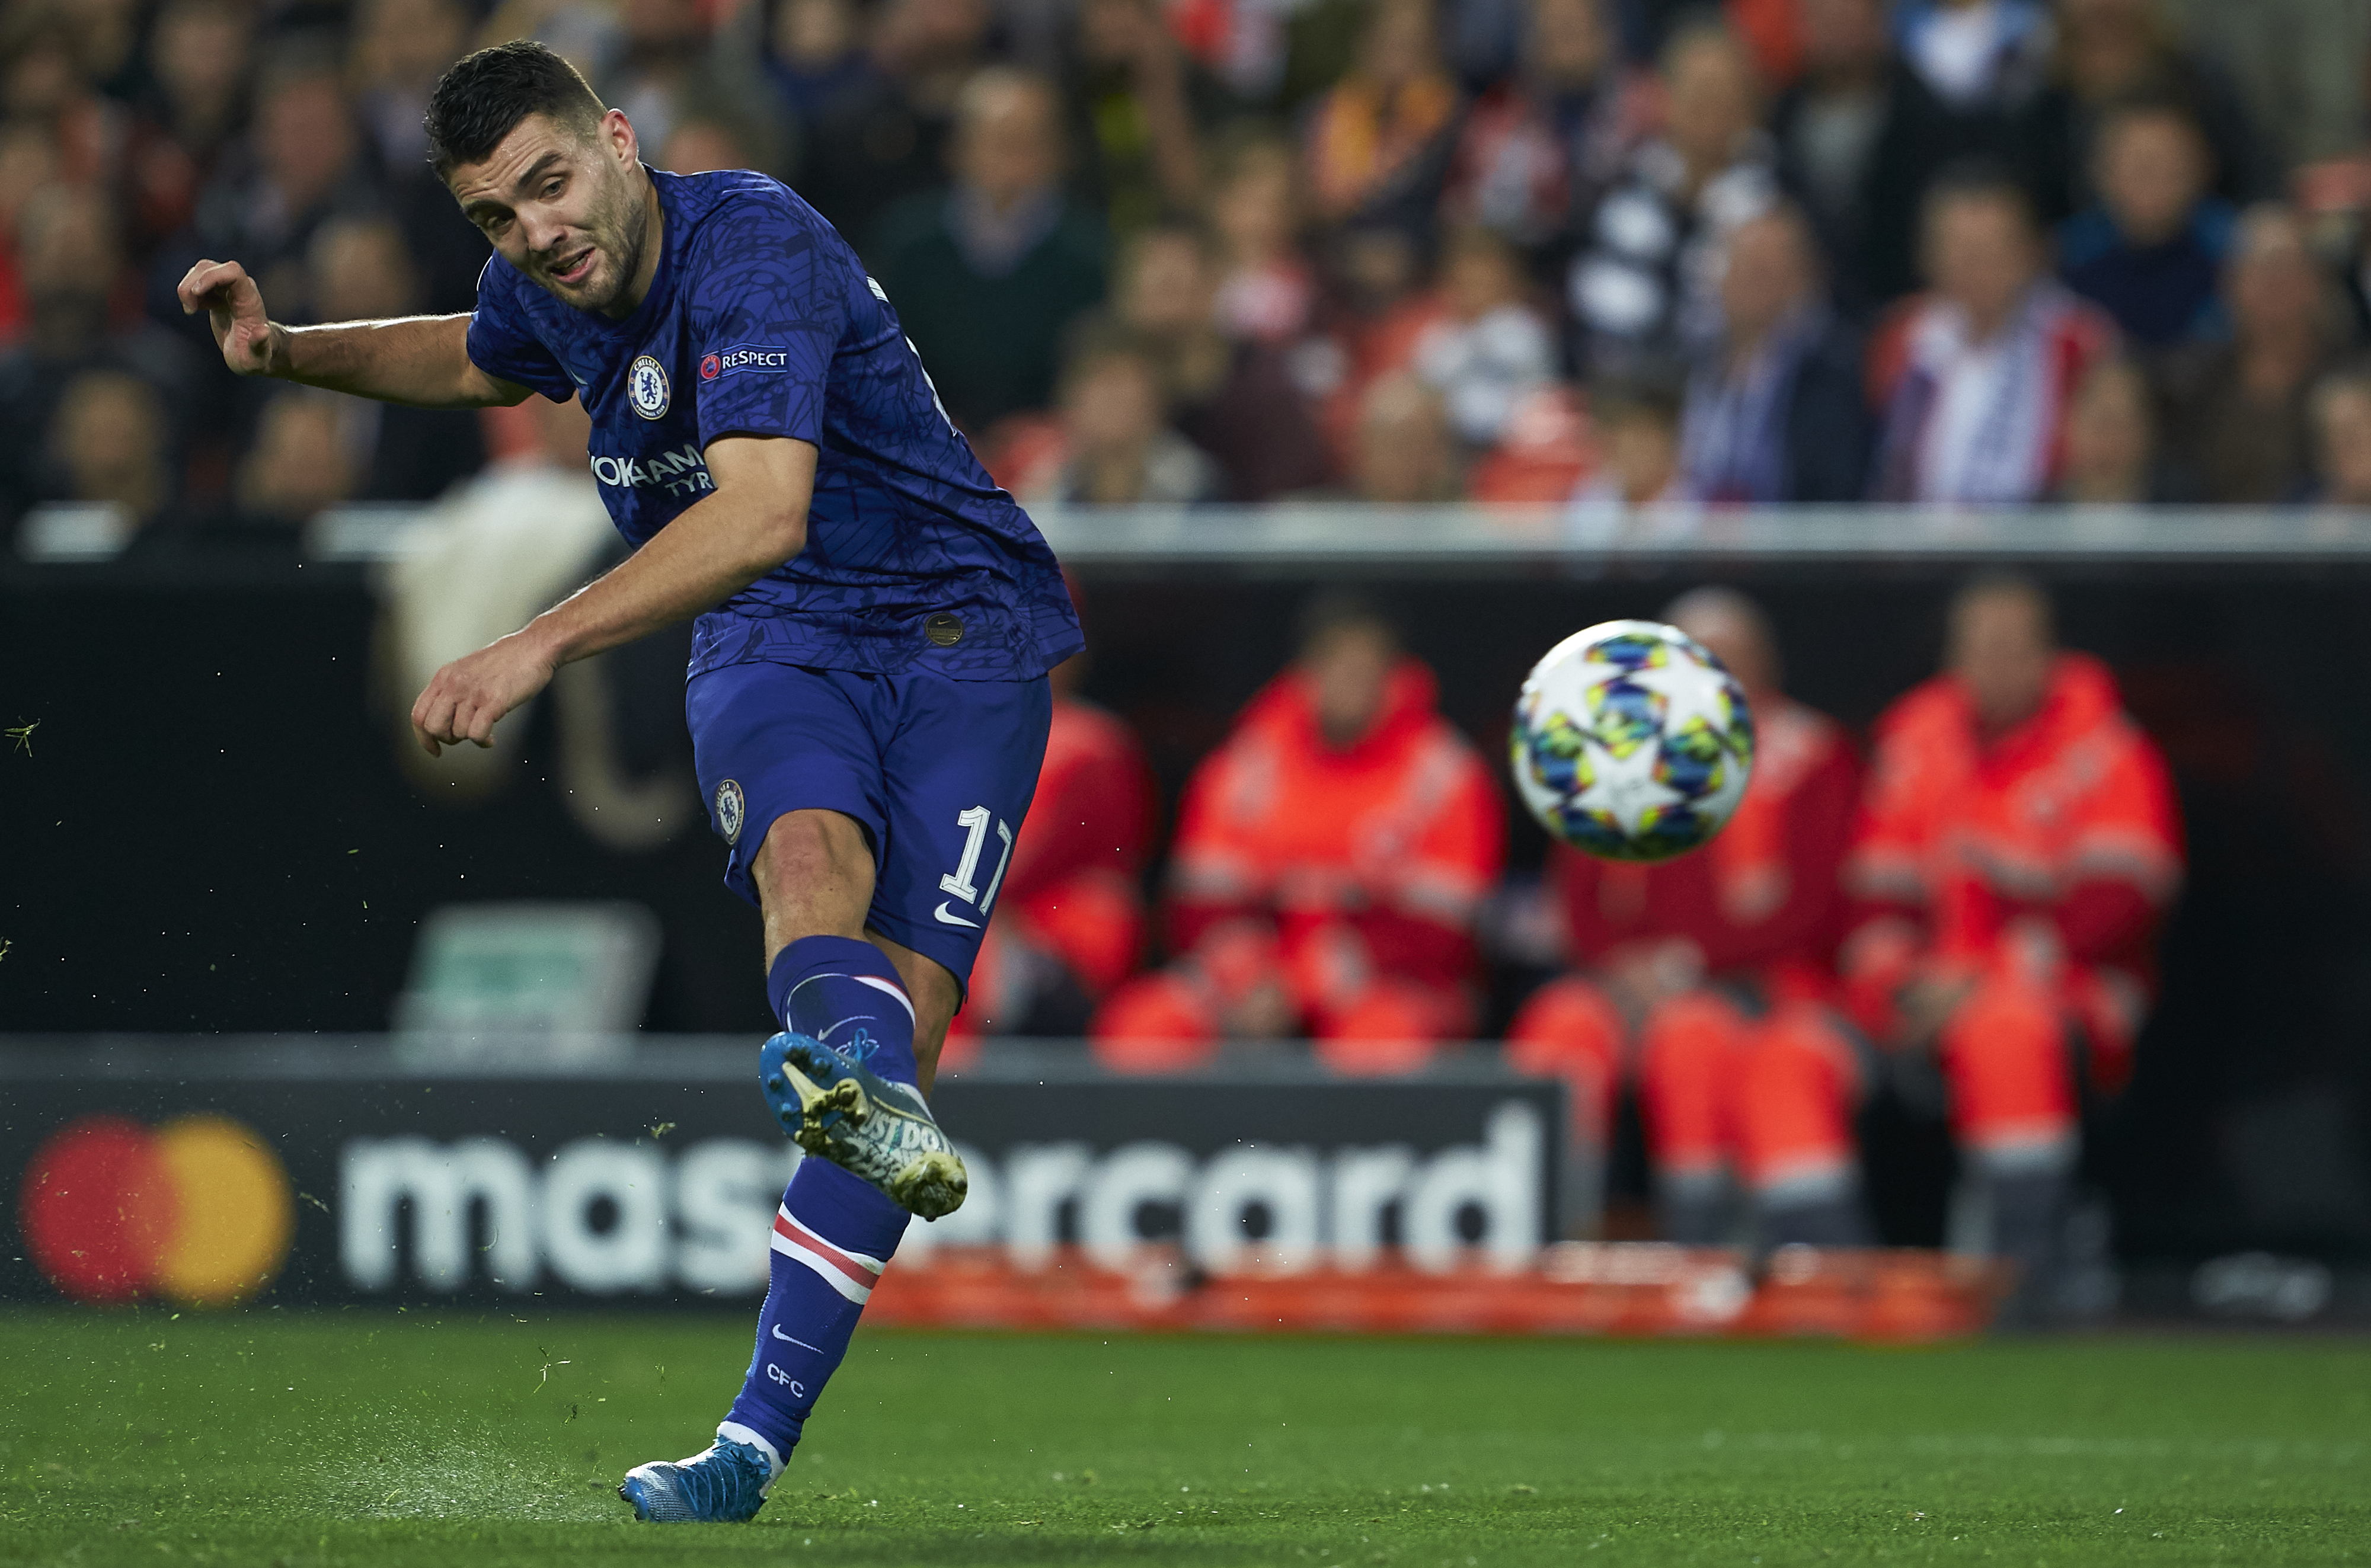 VALENCIA, SPAIN - NOVEMBER 27: Mateo Kovacic of Chelsea in action during the UEFA Champions League group H match between Valencia CF and Chelsea FC at Estadio Mestalla on November 27, 2019 in Valencia, Spain. (Photo by Manuel Queimadelos Alonso/Getty Images)